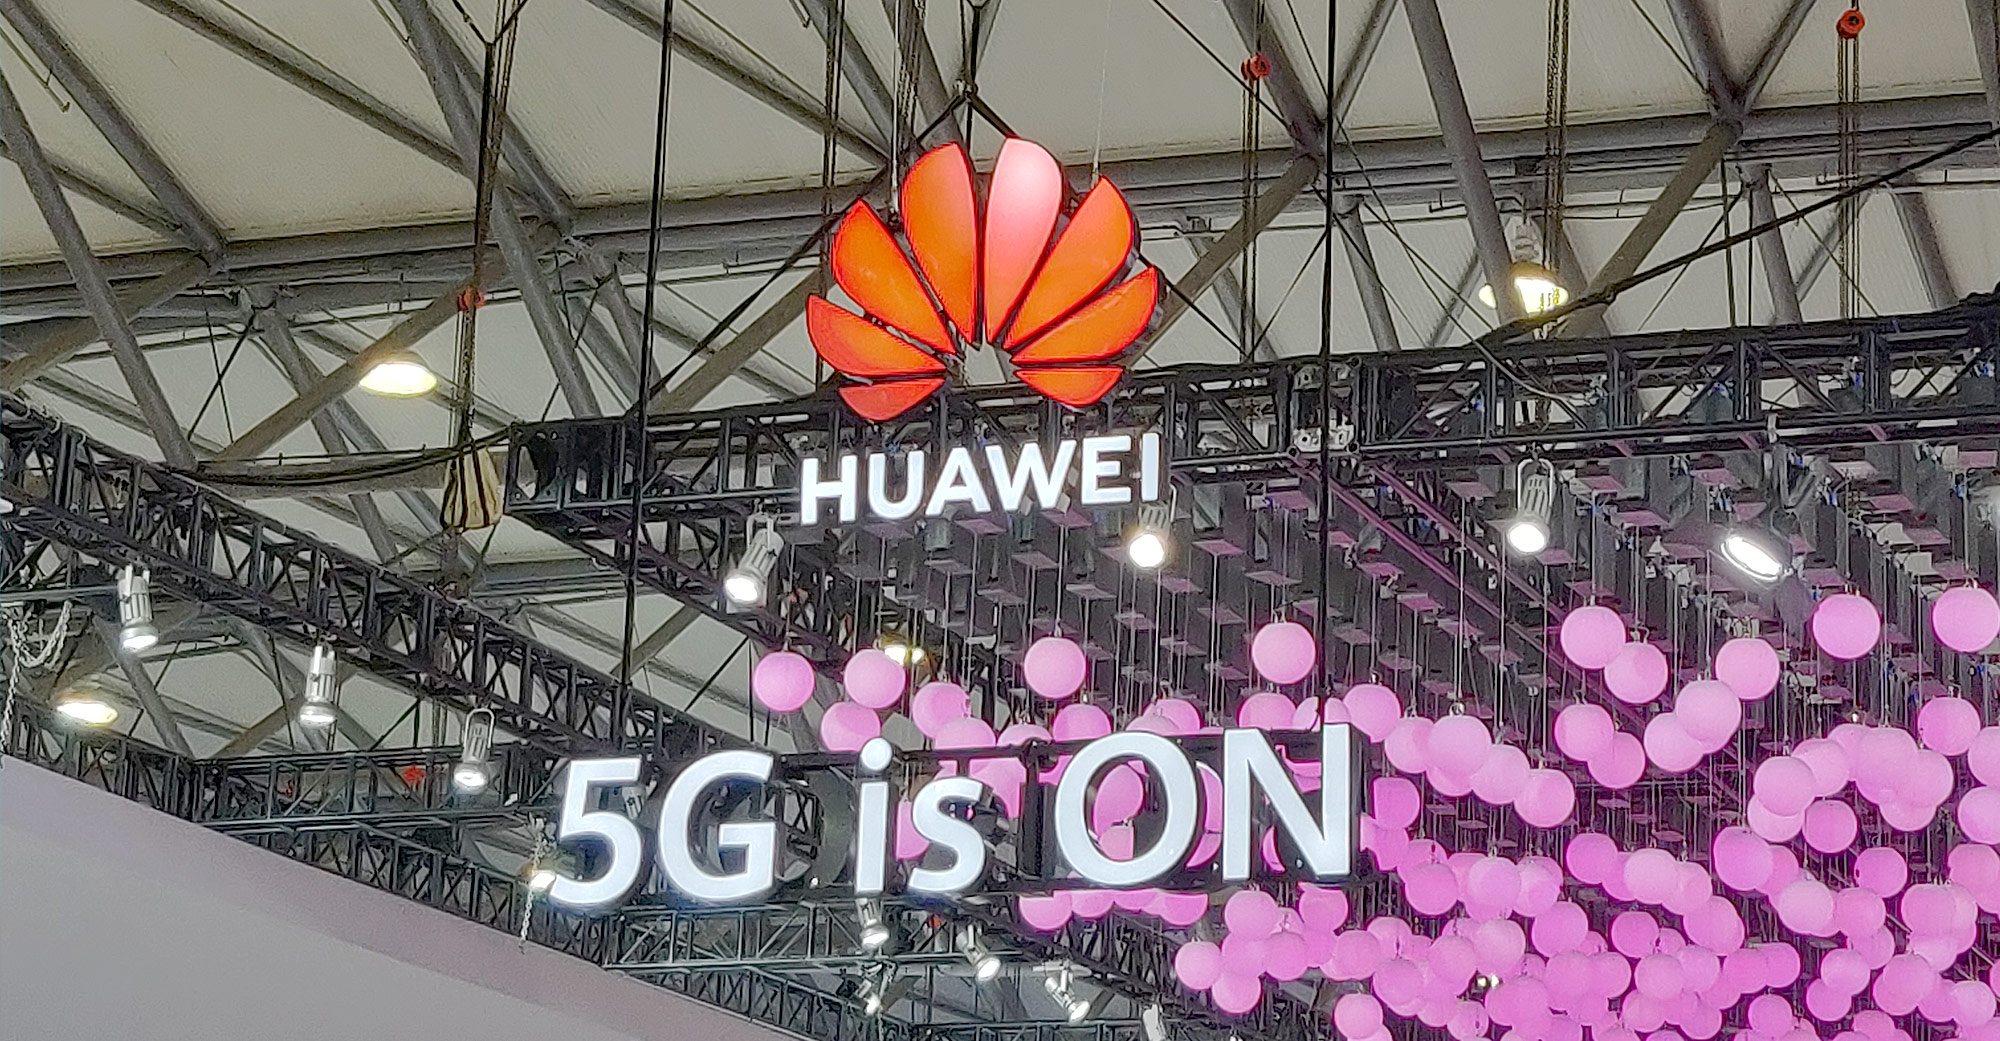 5G Cloud Gaming: The Next Playground for Qualcomm and Huawei